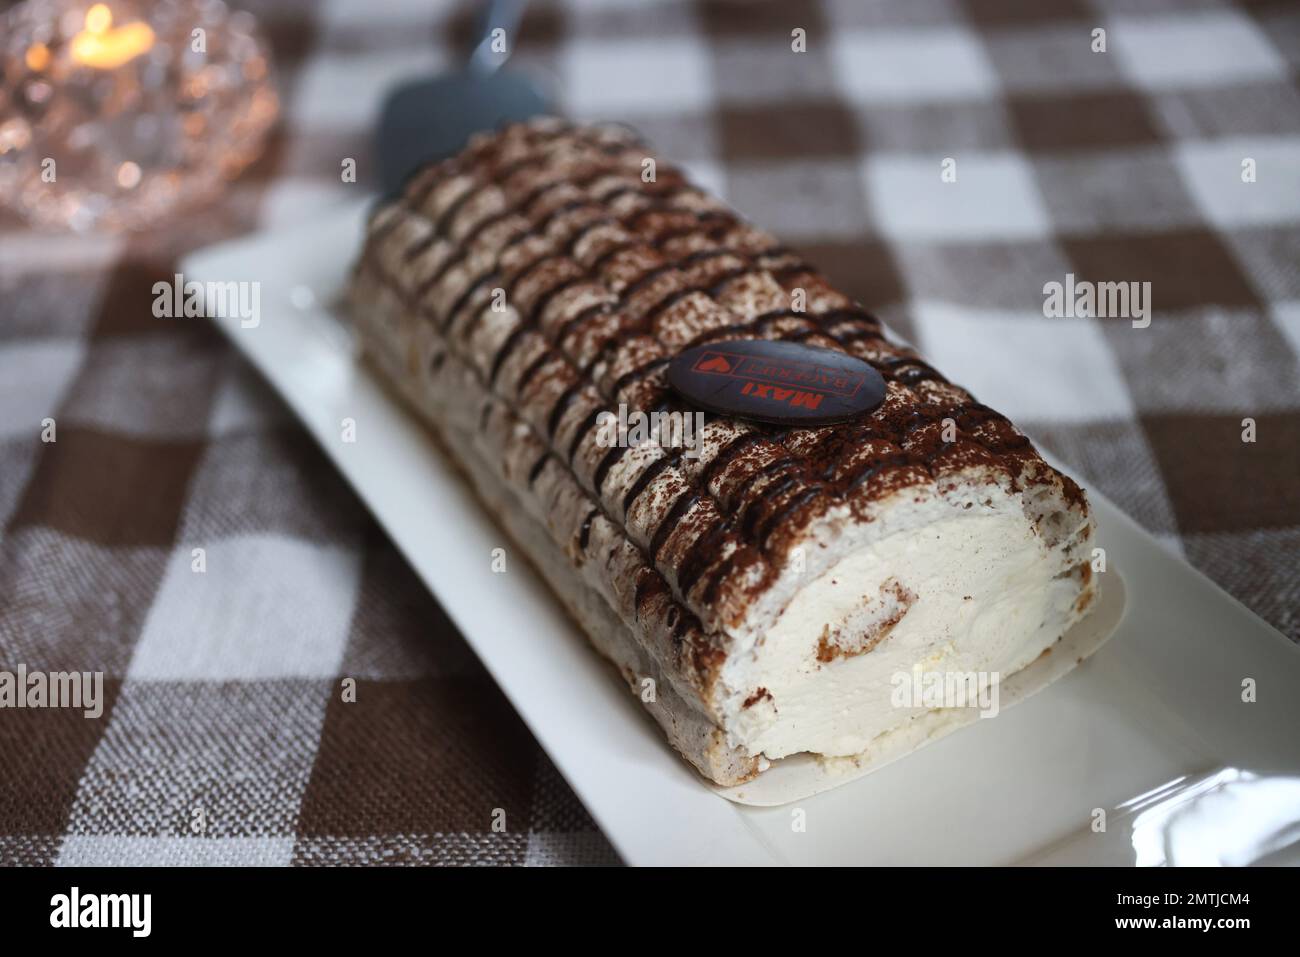 'Budapestbakelse', (In english: Budapest pastry). Stock Photo